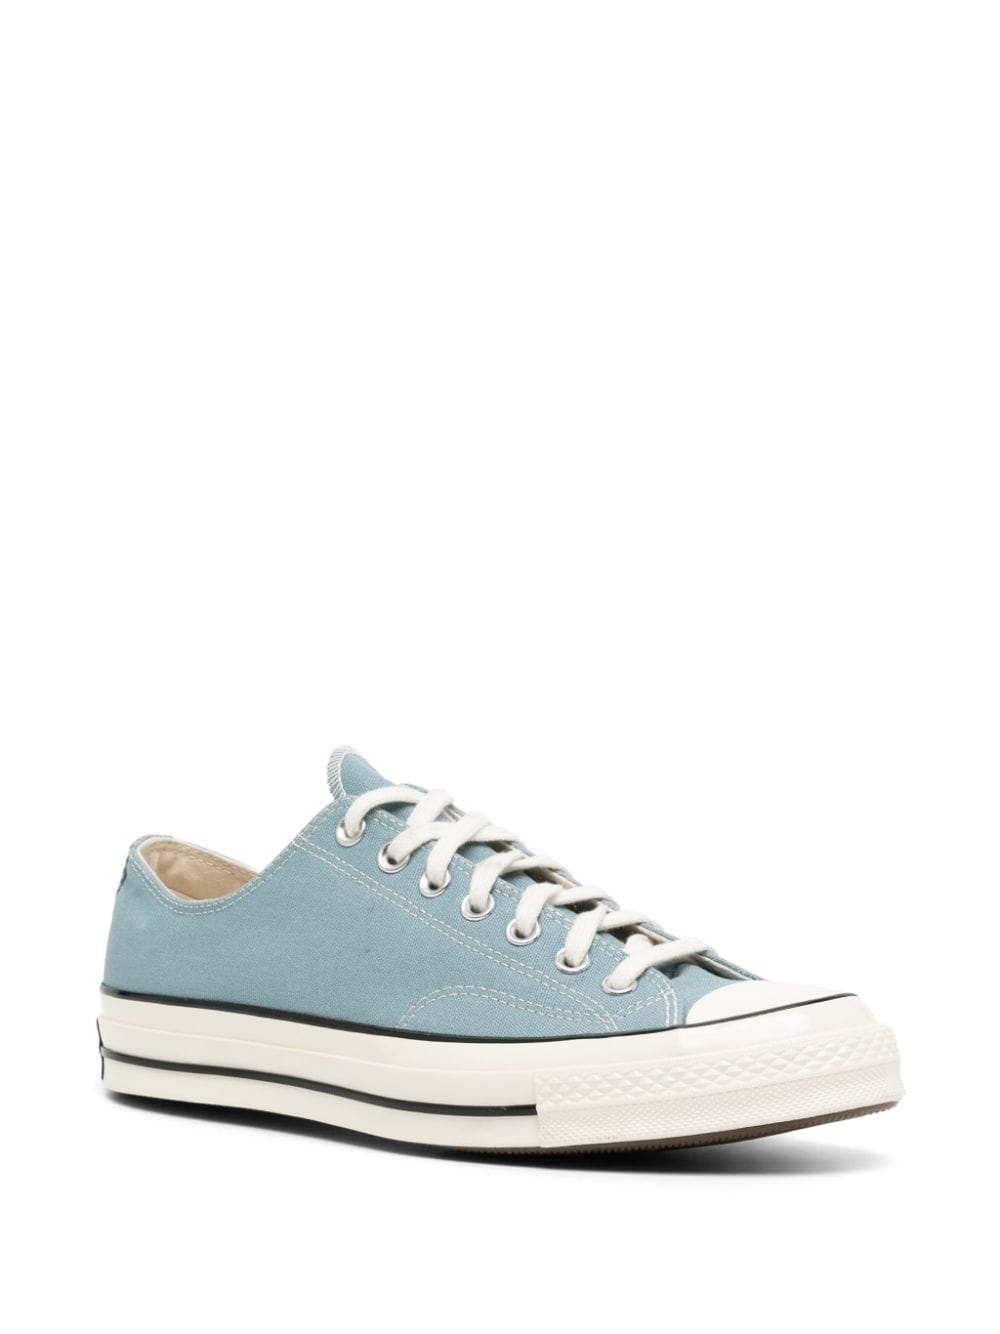 Converse Chuck 70 Low OX sneakers - Blauw